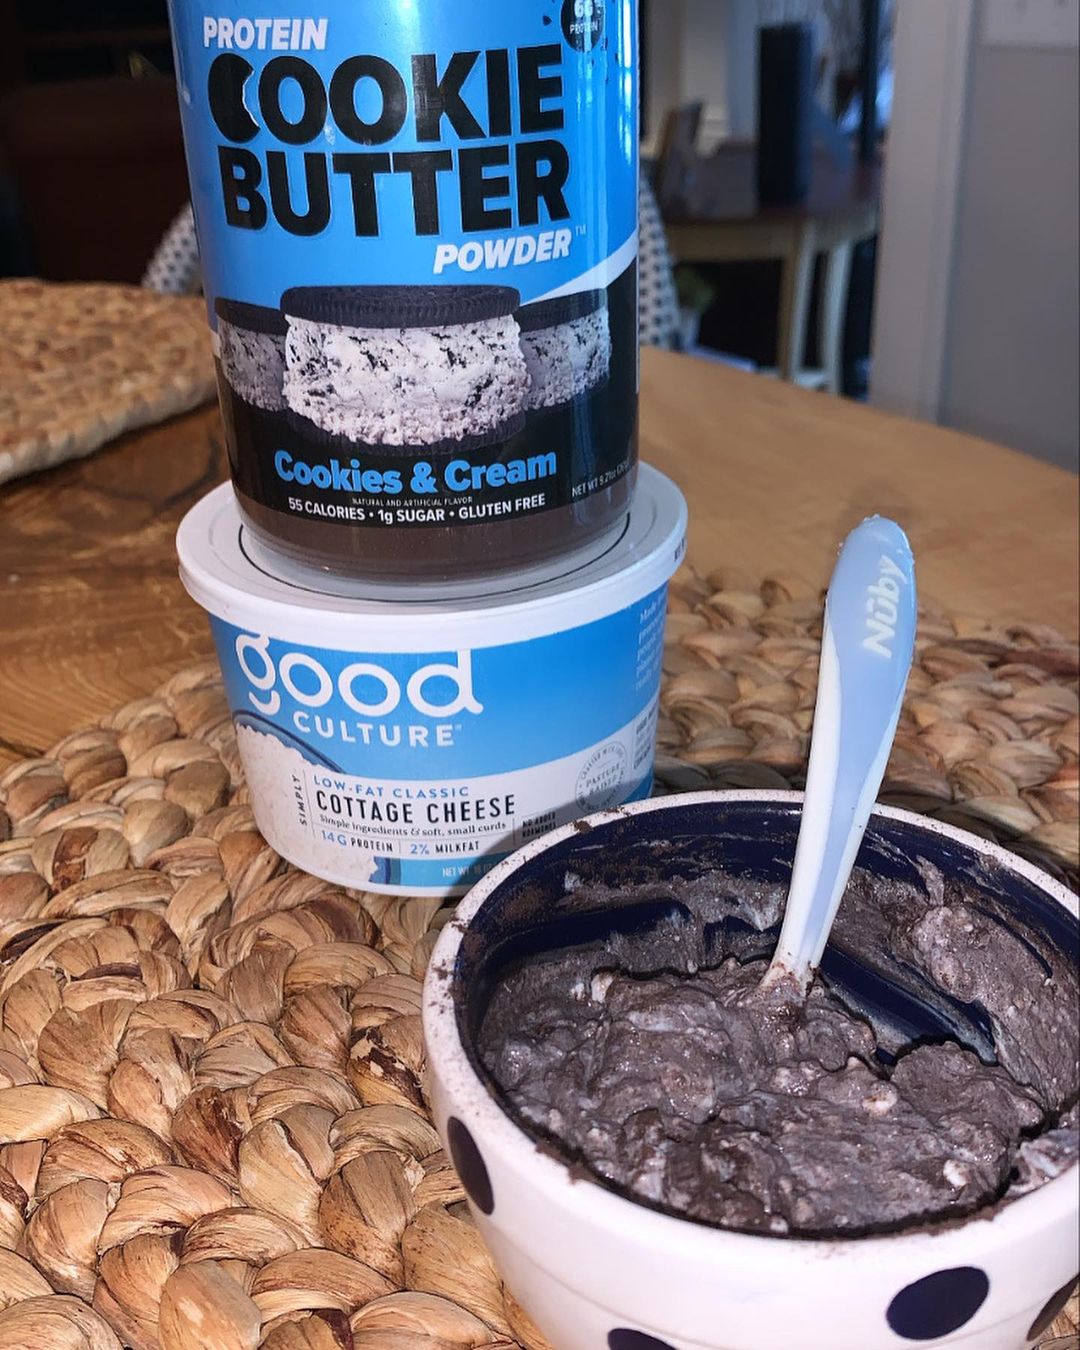 Cookies N Cream Protein Pudding⁣